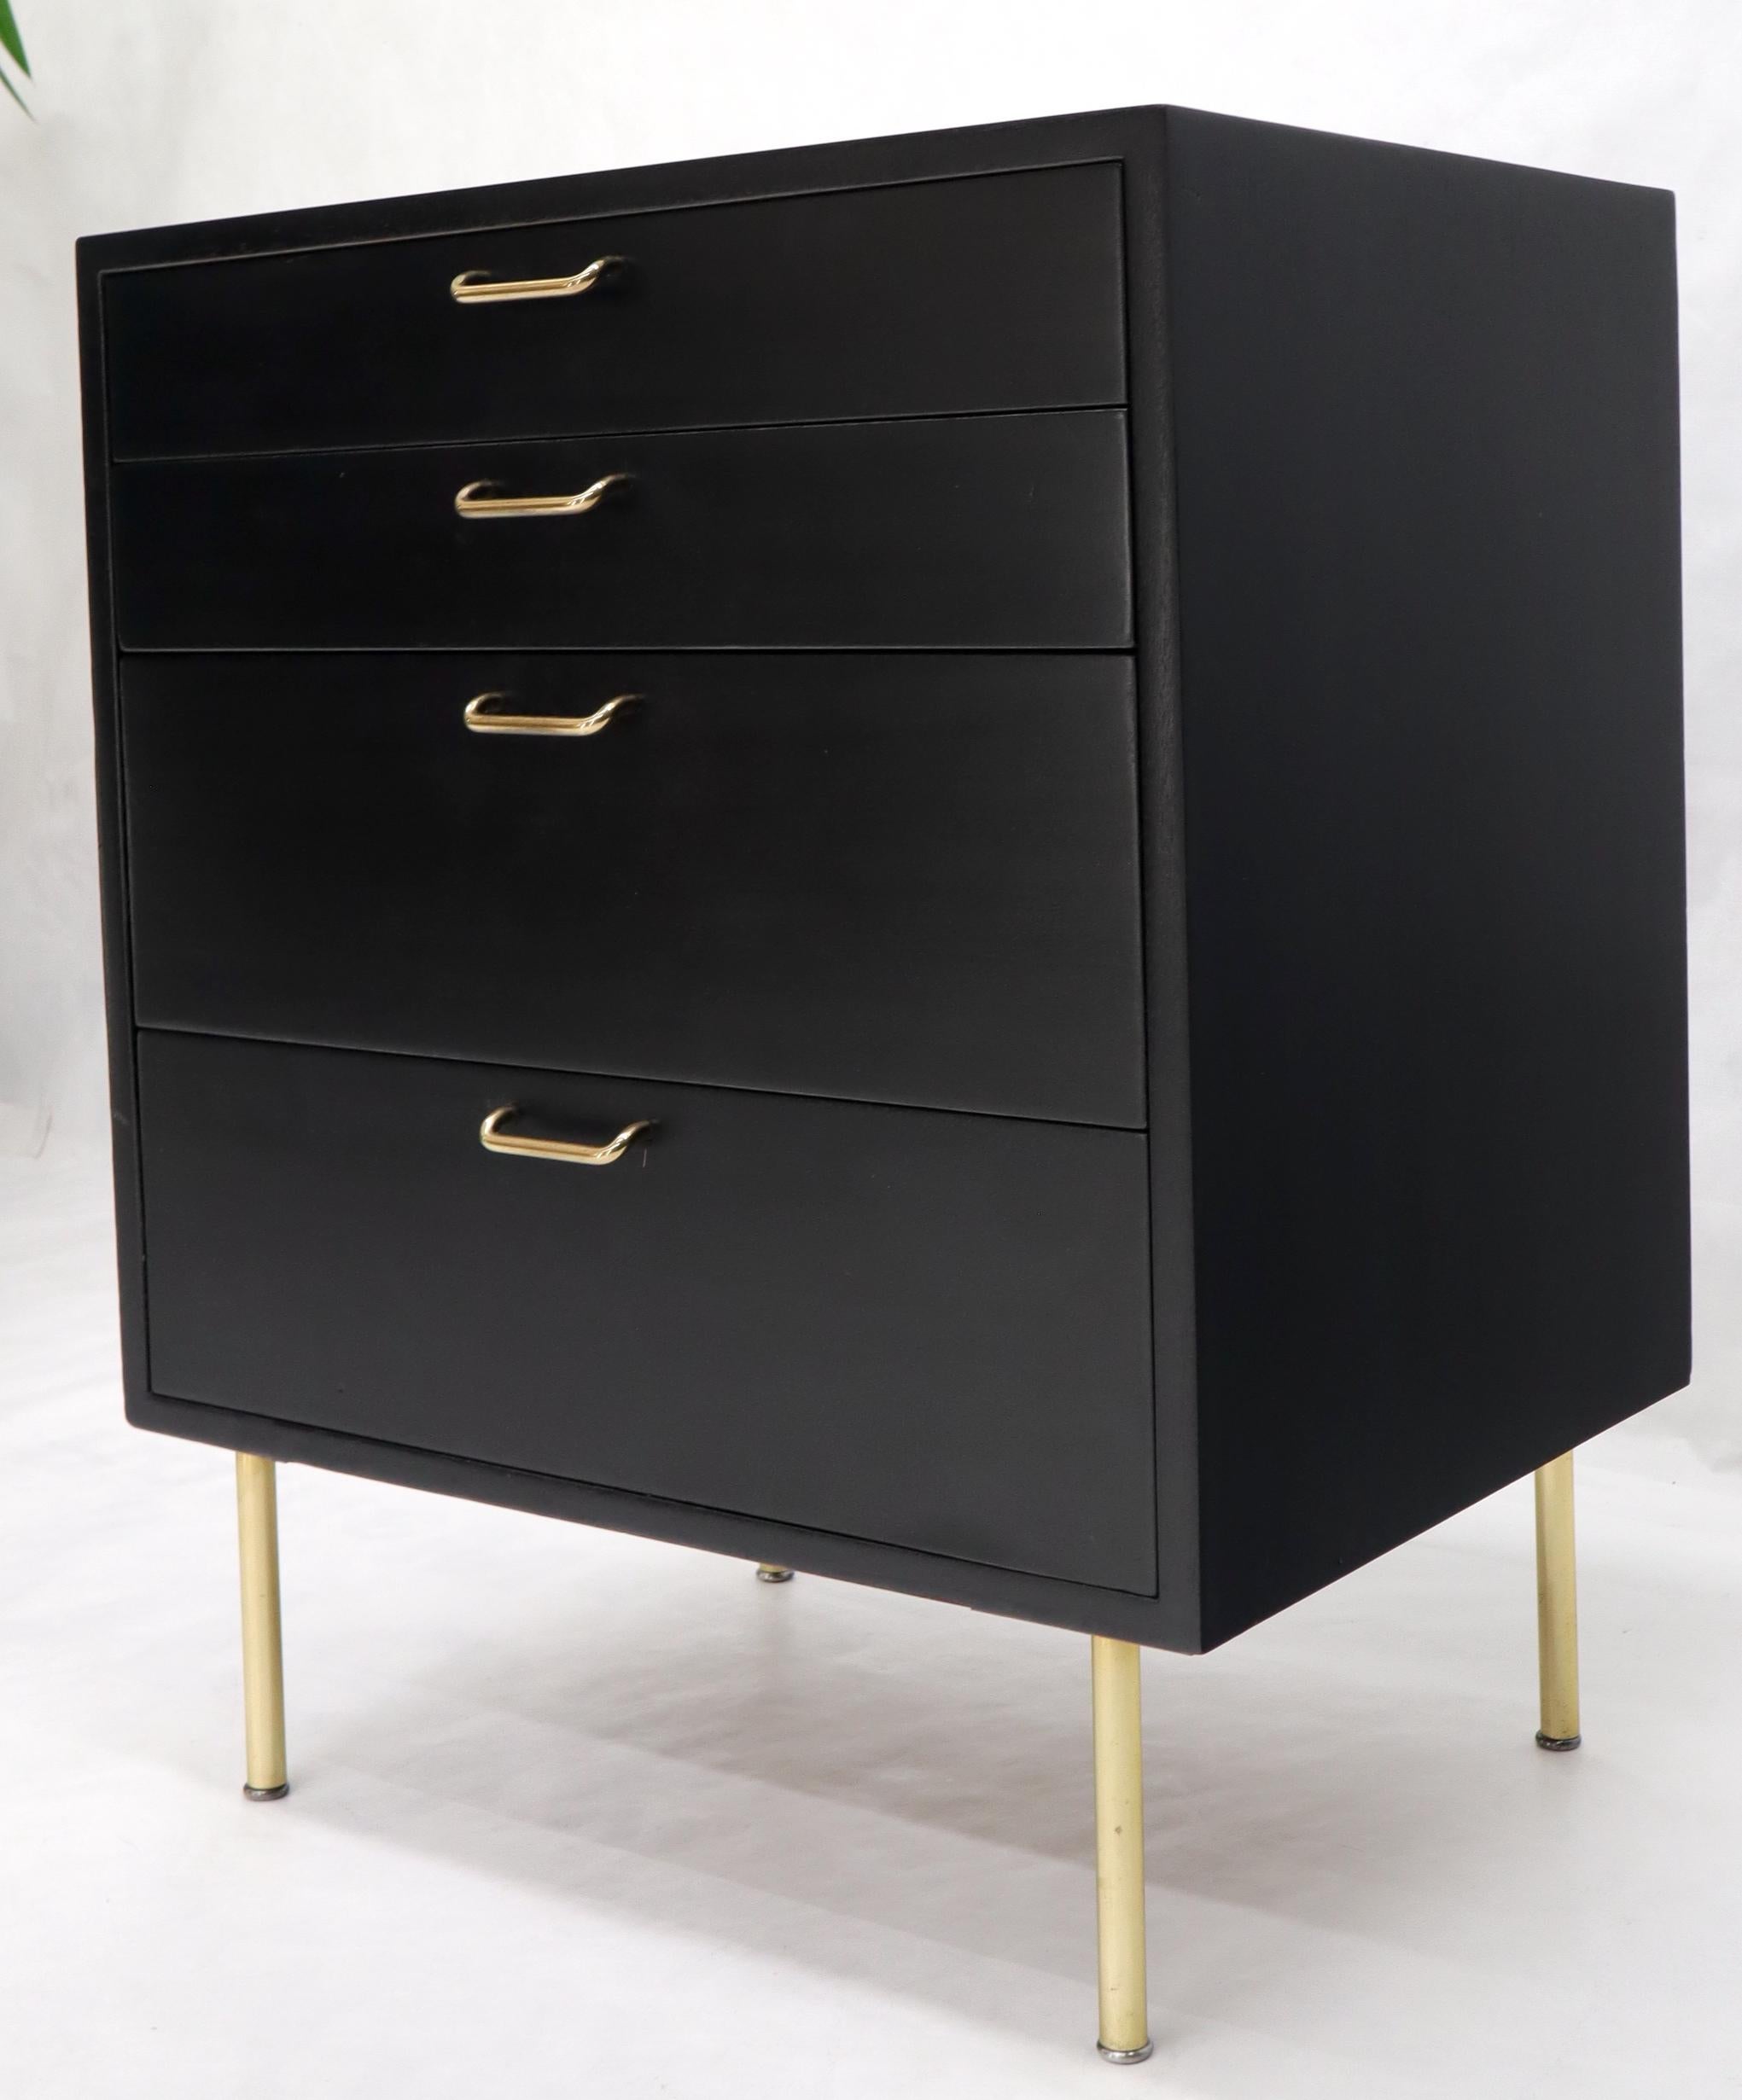 Lacquered Harvey Probber Black Lacquer Mahogany Brass Hardware and Legs 4 Drawer Chest For Sale